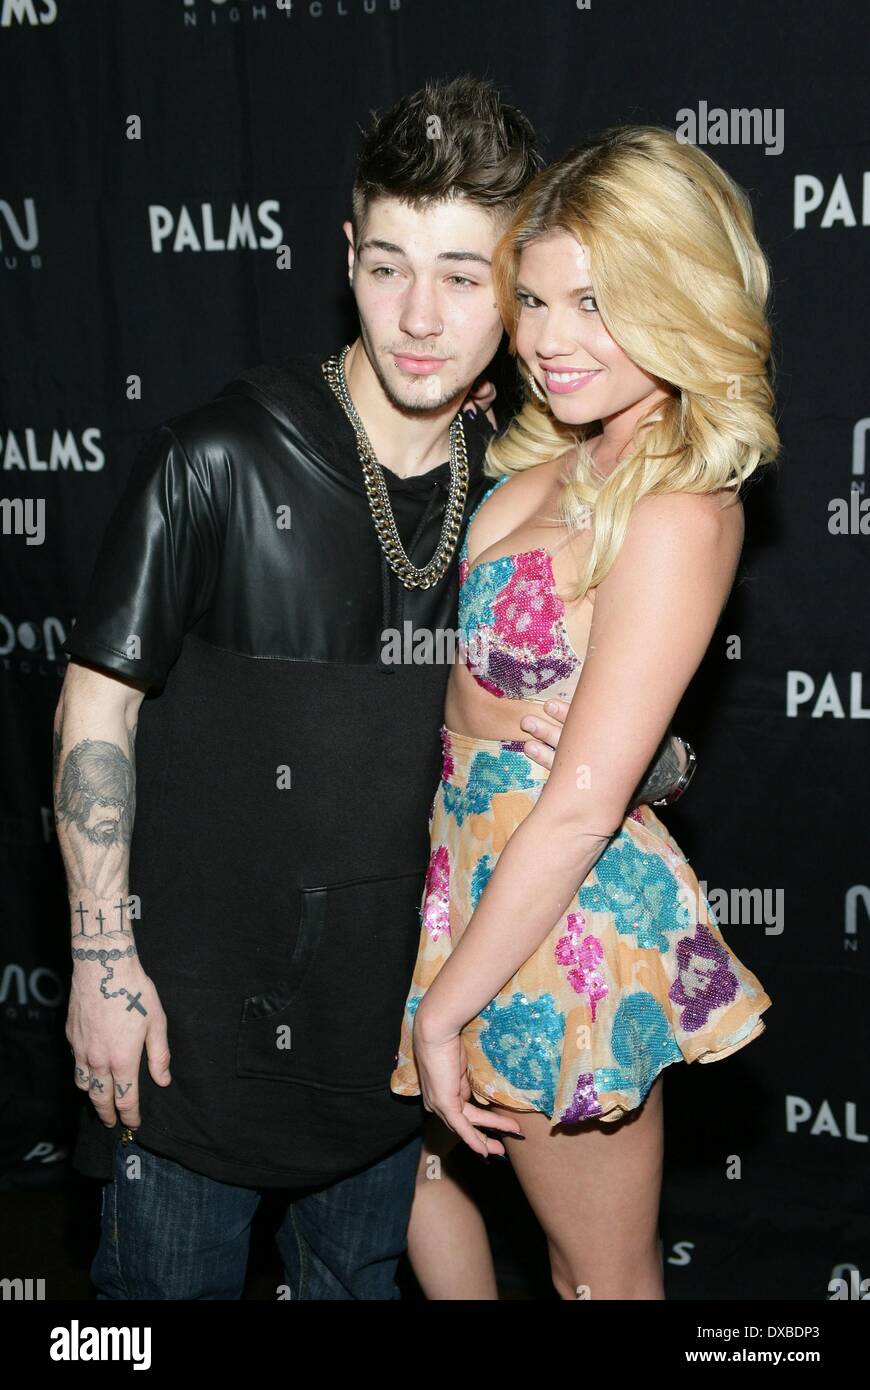 Las Vegas, NV, USA. 22nd Mar, 2014. Liam Horne, Chanel West Coast at  arrivals for Chanel West Performs at Moon Nightclub, 4321 W. Flamingo Rd.,  Las Vegas, NV March 22, 2014. Credit: